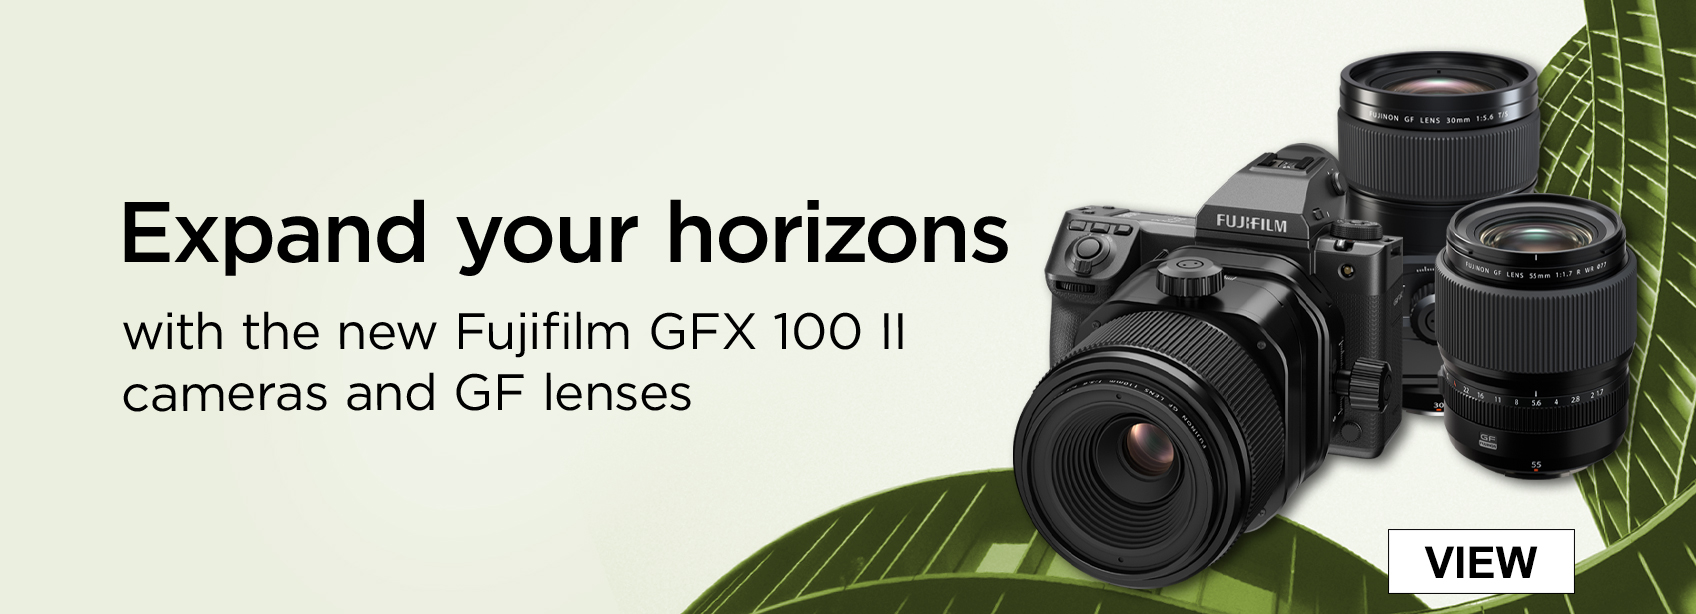 Expand your horizons with the new Fujifilm GFX 100 II cameras and GF lenses.